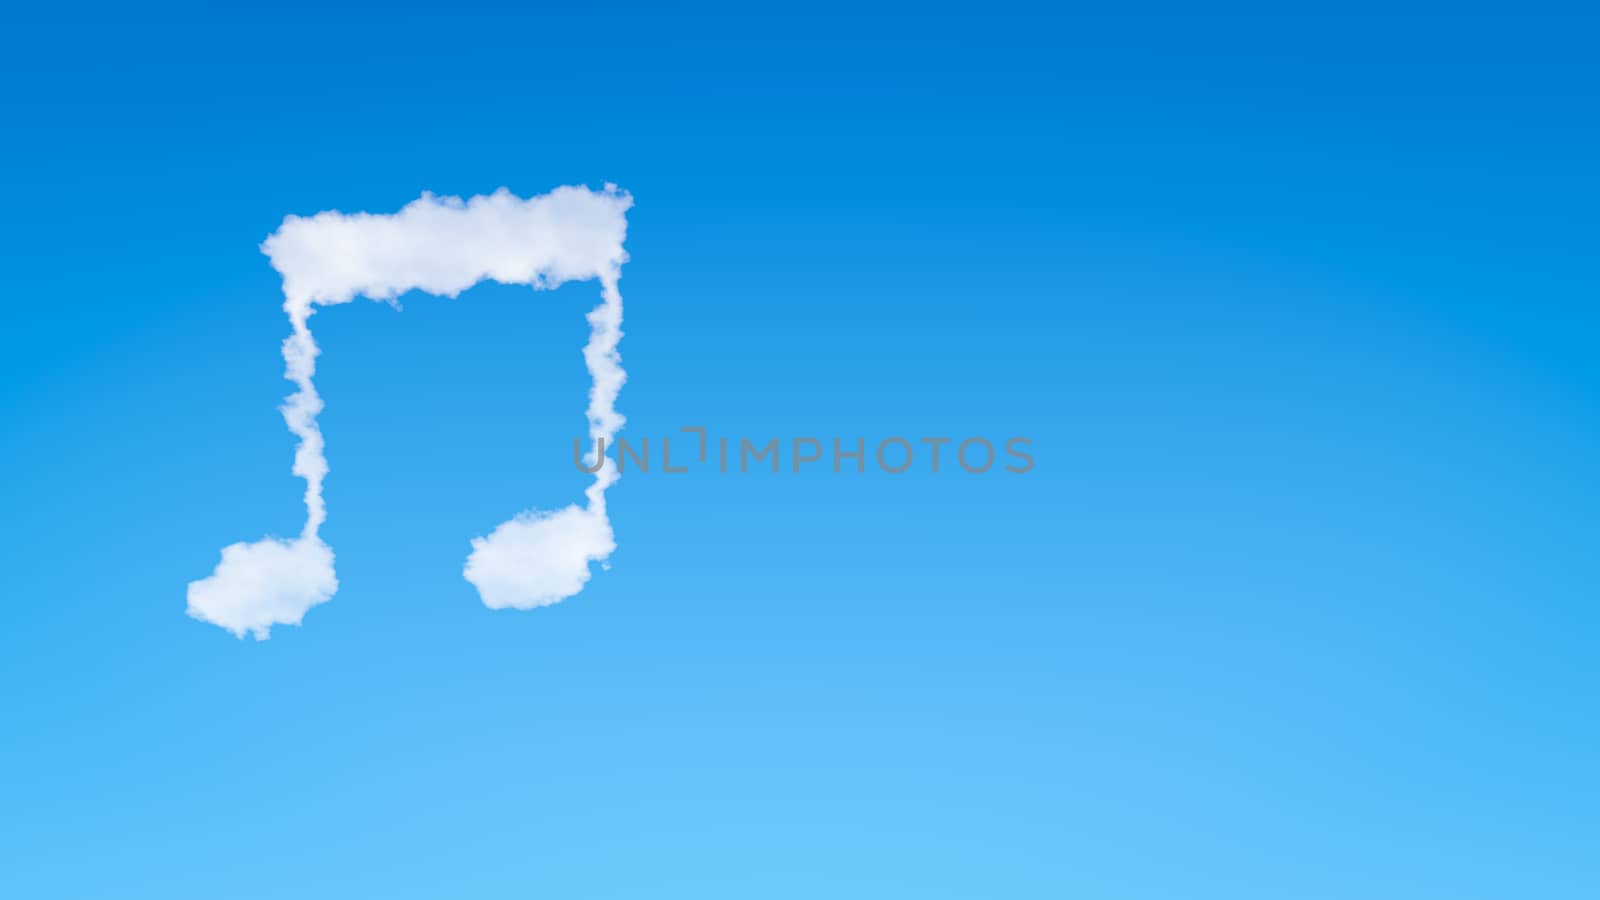 Musical Notes Symbol Shape Cloud in the Blue Sky with Copyspace